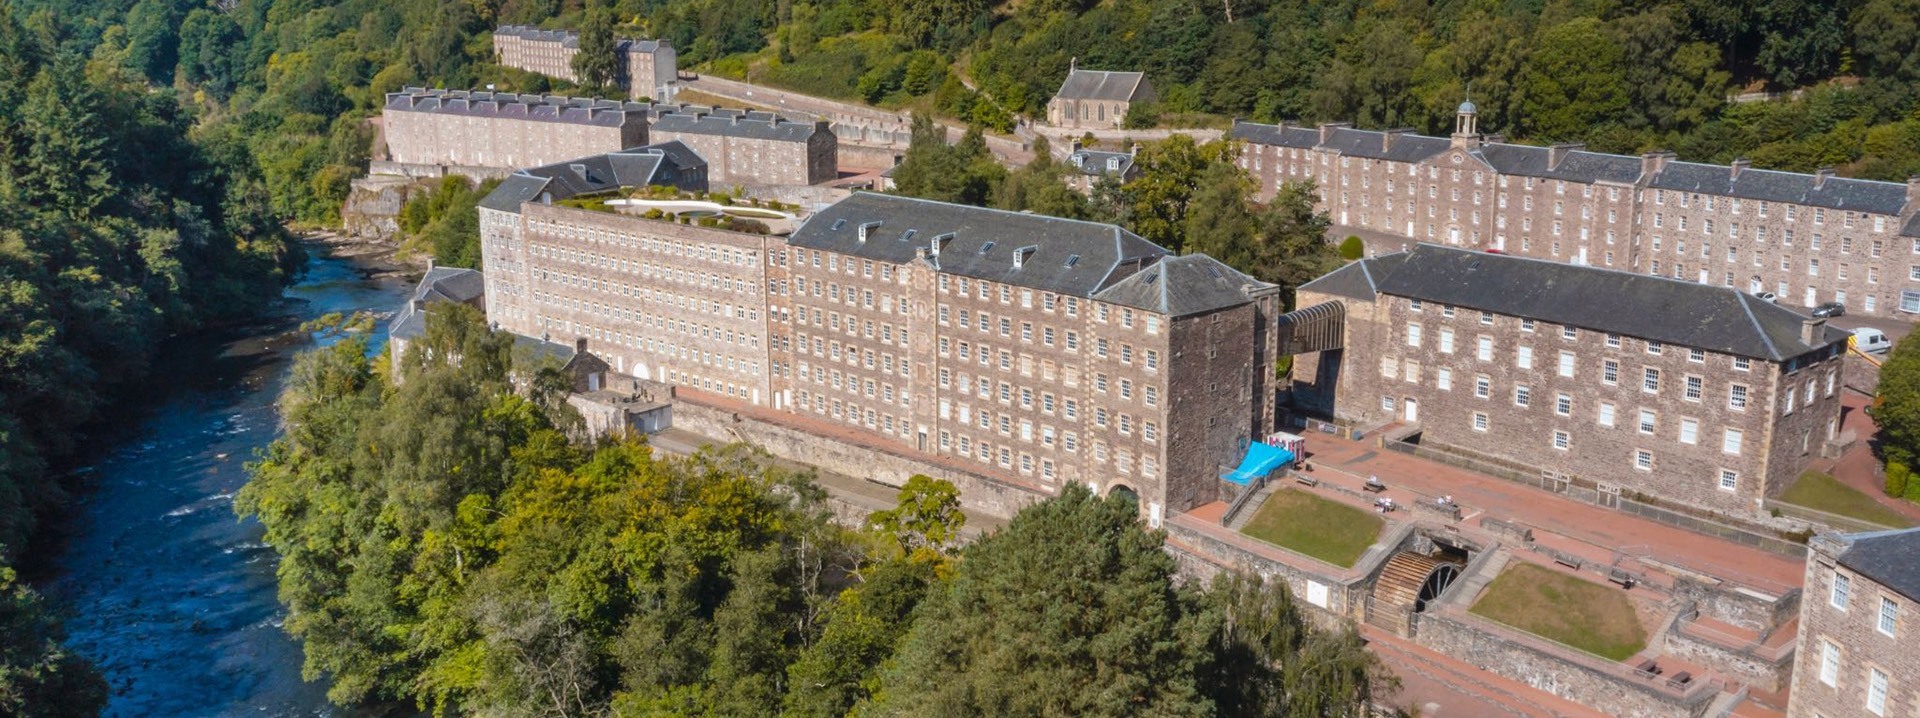 An aerial shot of the buildings of New Lanark, surrounded by trees and the river